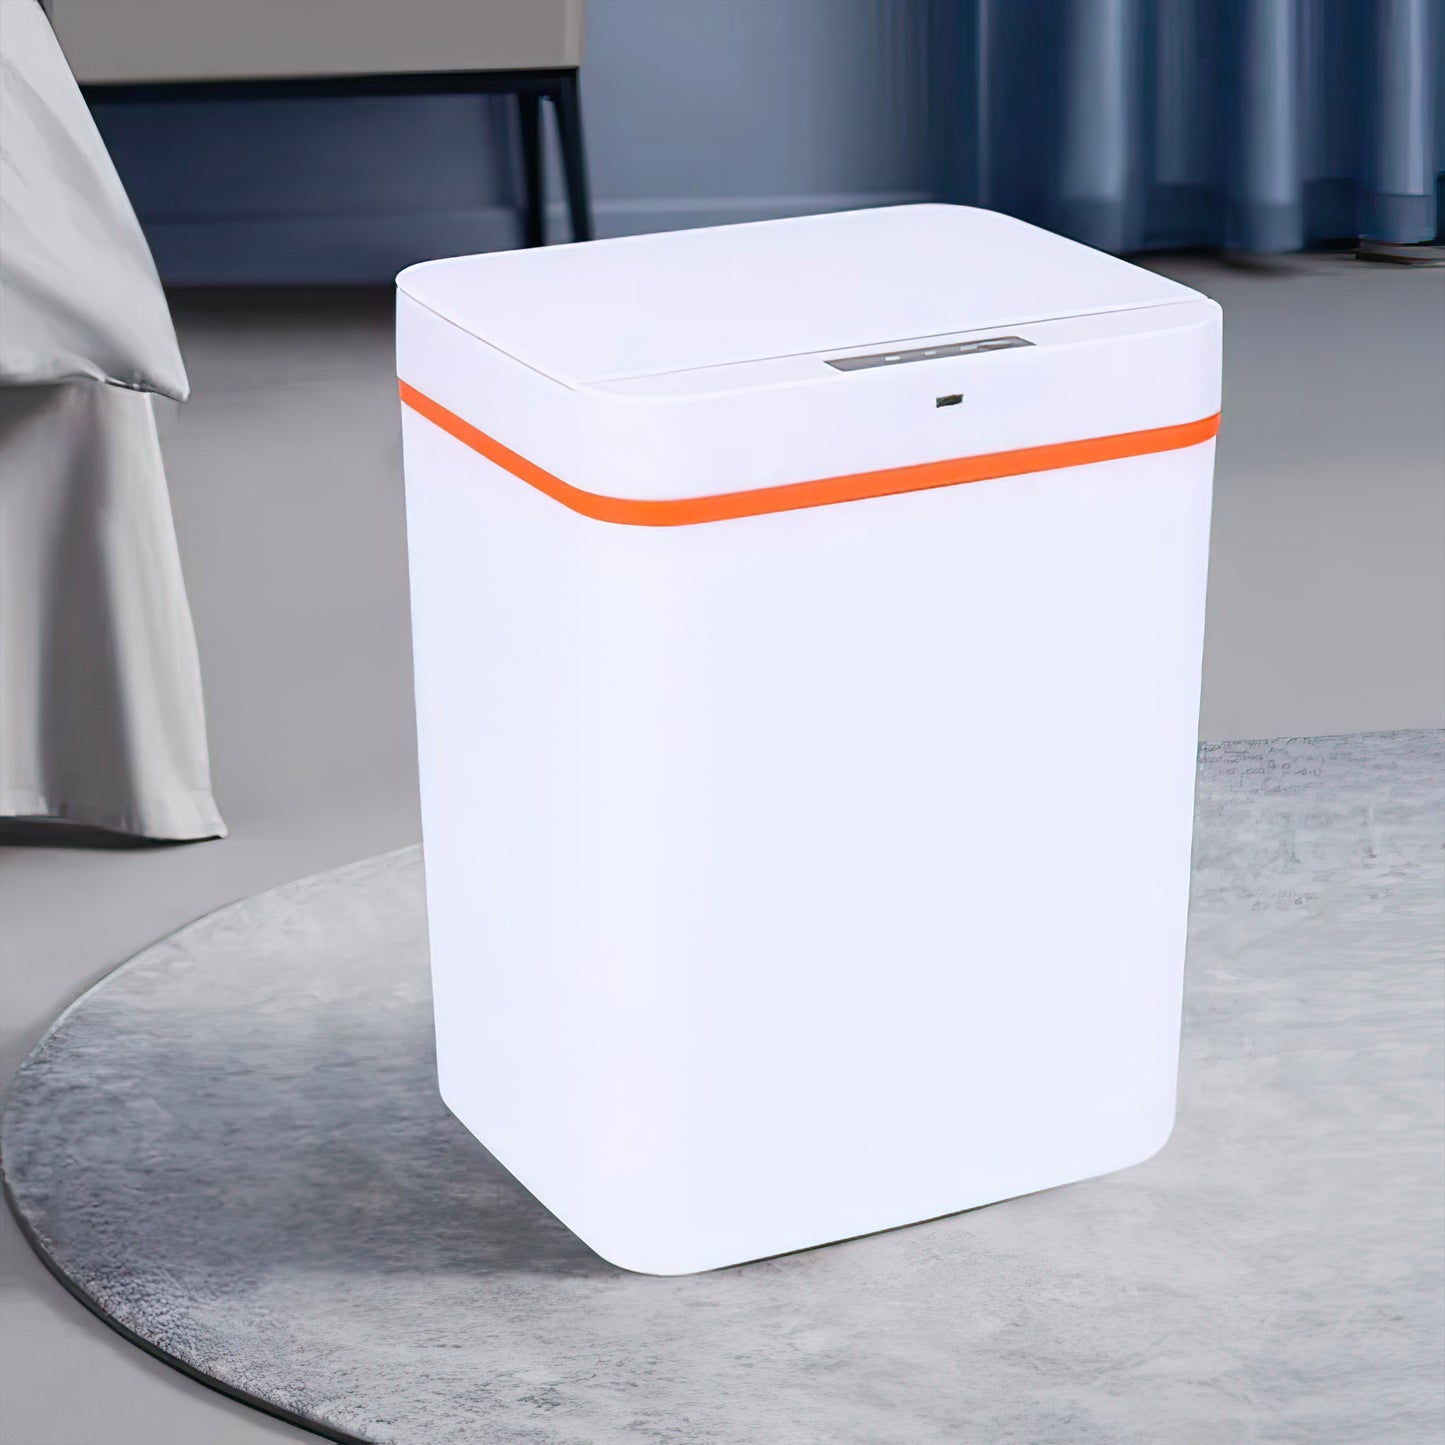 Smart Automatic Dustbin Sensor With Hand Gesture